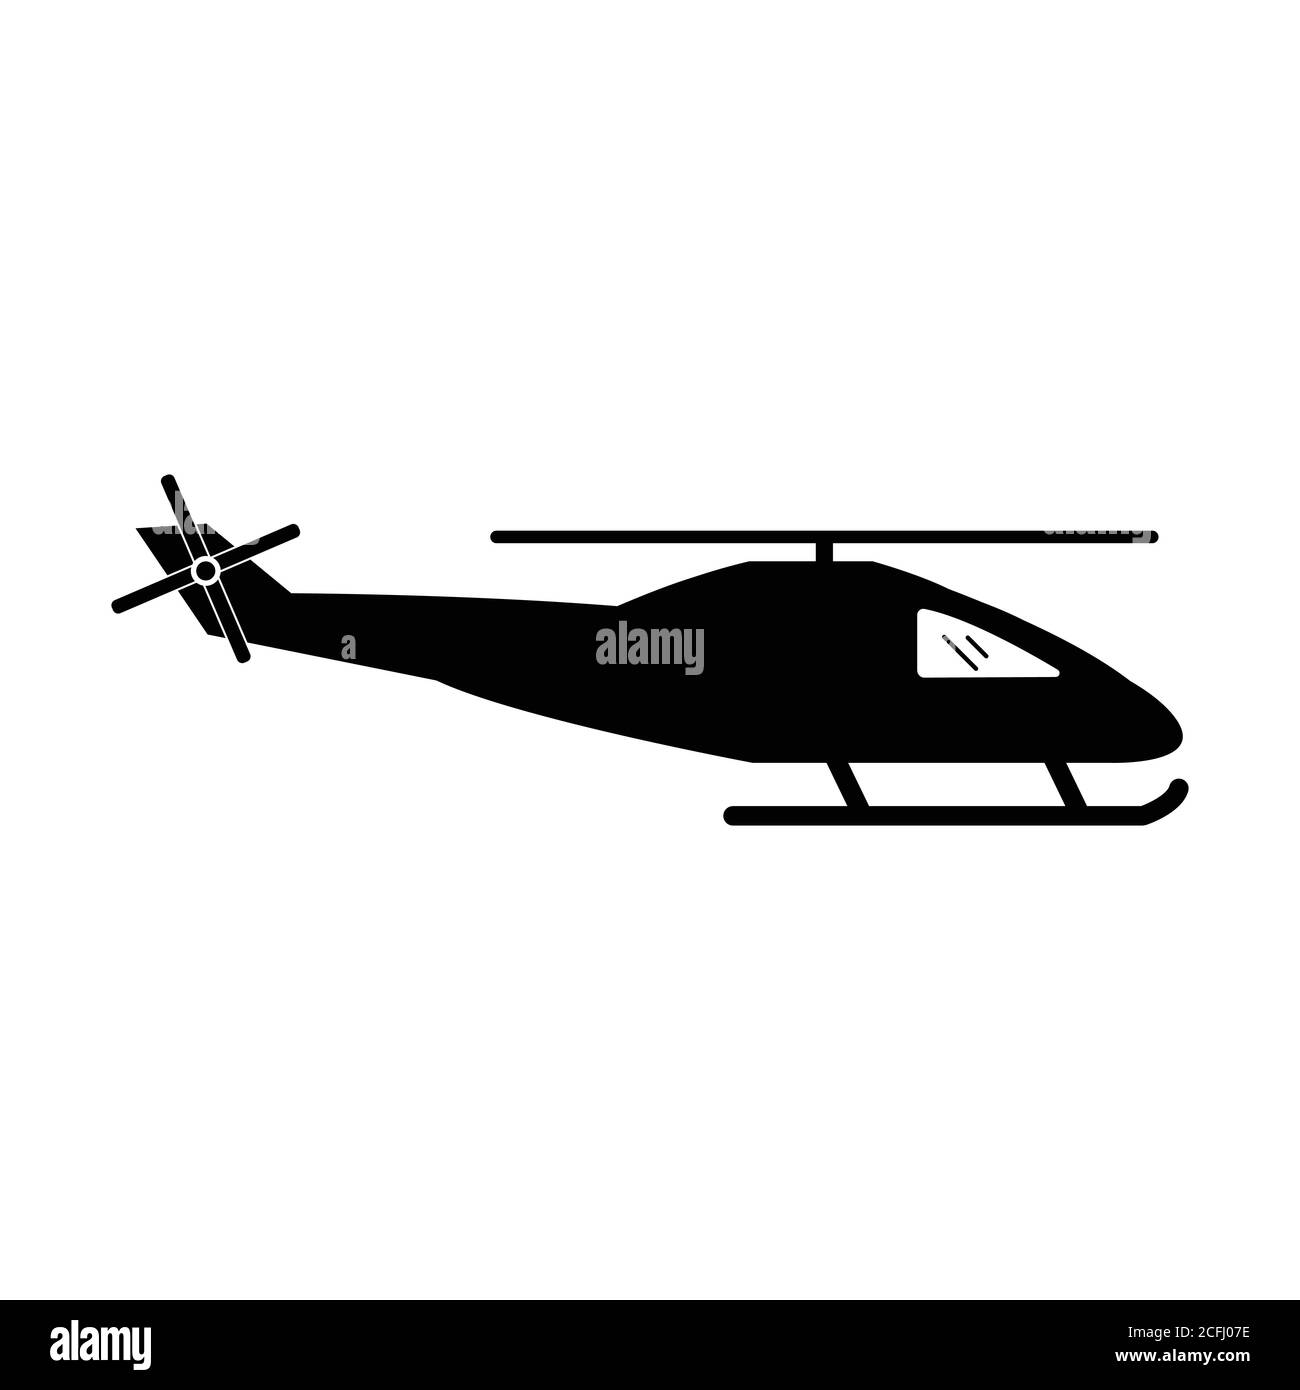 Helicopter Icon. Clip Art Pictogram Depicting a Black and White Helicopter Chopper. EPS Vector Stock Vector